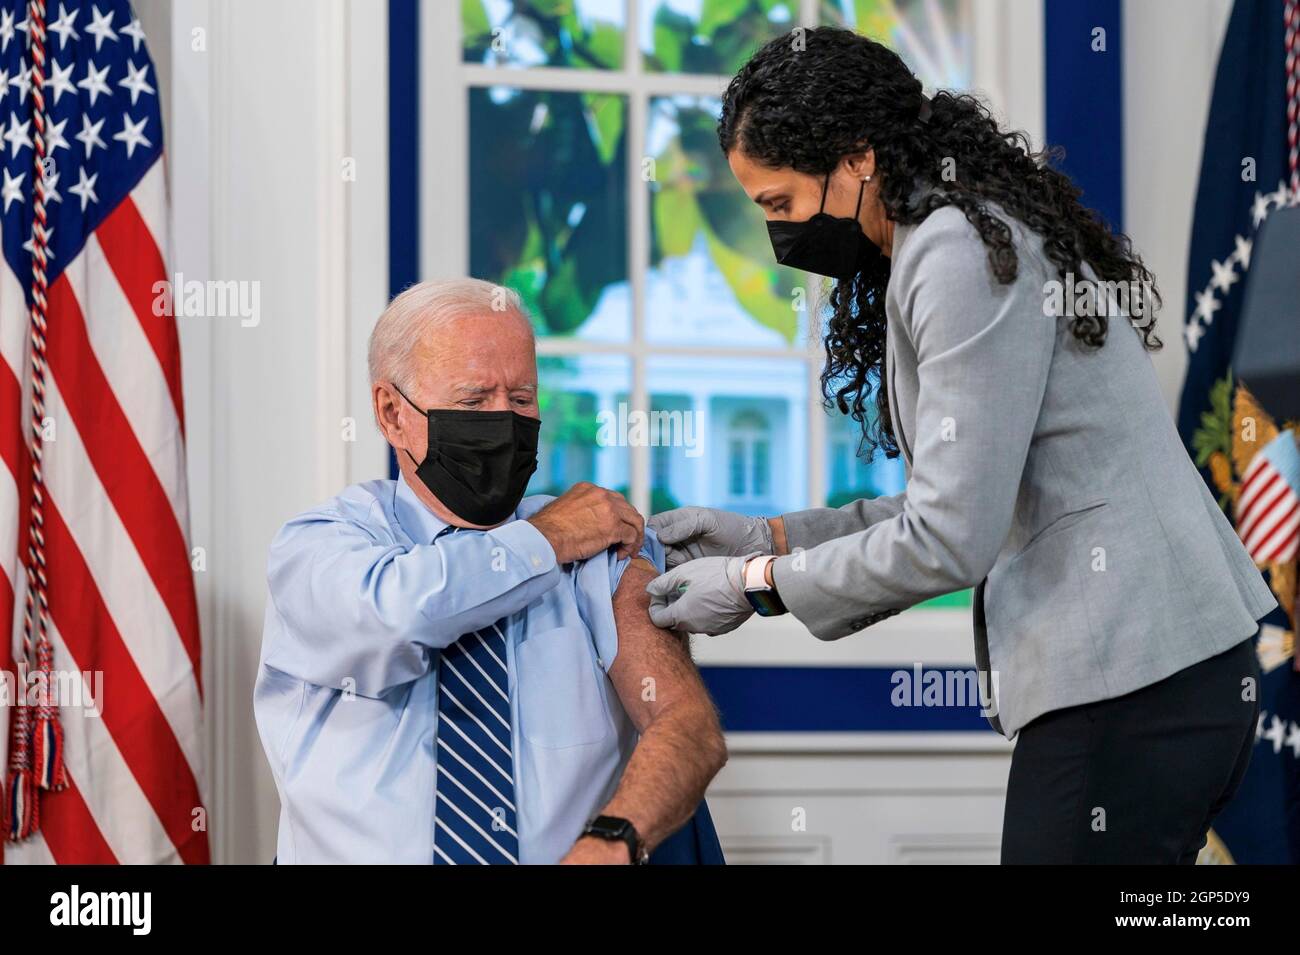 Washington, United States Of America. 27th Sep, 2021. Washington, United States of America. 27 September, 2021. U.S President Joe Biden, helps roll up his sleep as he prepares to receive a booster dose of the Pfizer BioNTech Covid-19 vaccine in the South Court Auditorium of the White House September 27, 2021 in Washington, DC The CDC is recommending Americans over 65 and frontline workers receive booster shot six months after their second dose. Credit: Adam Schultz/White House Photo/Alamy Live News Stock Photo